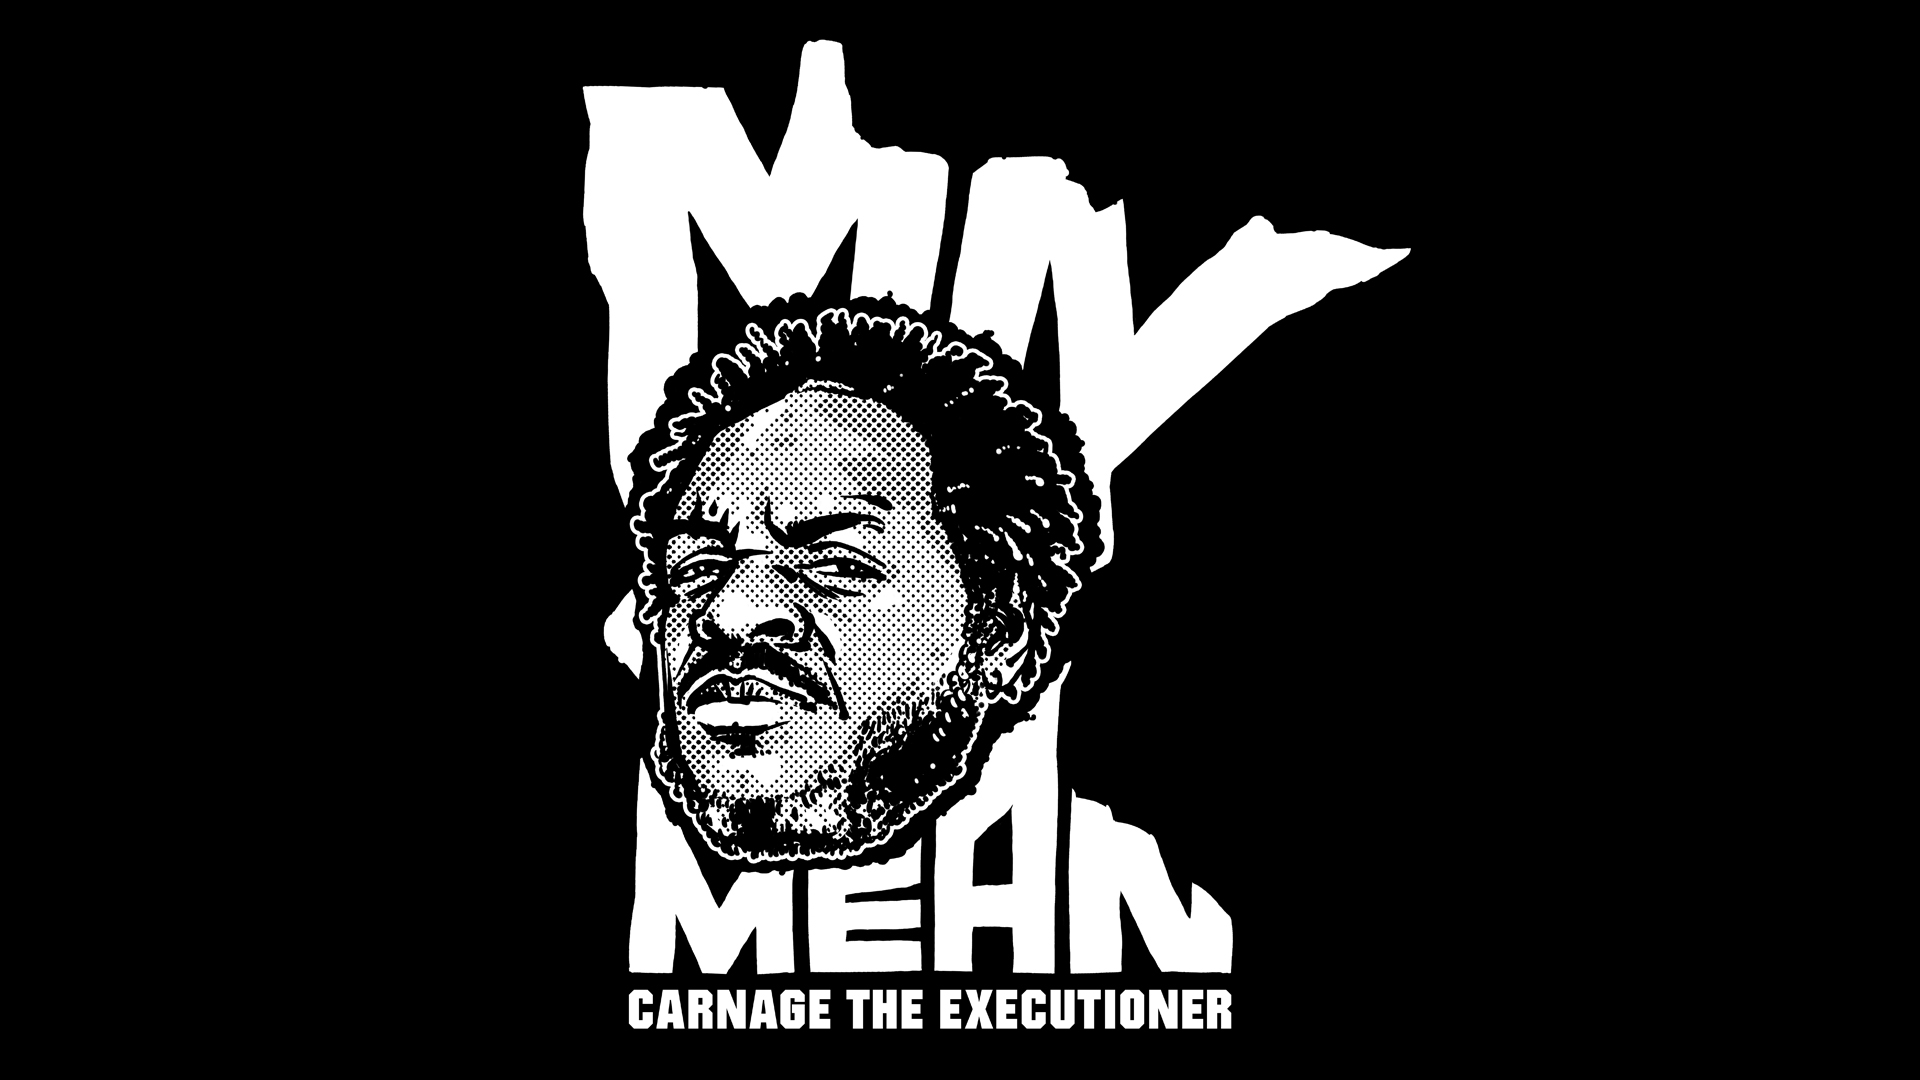 New Carnage the Executioner Music Video: “Minnesota Mean”